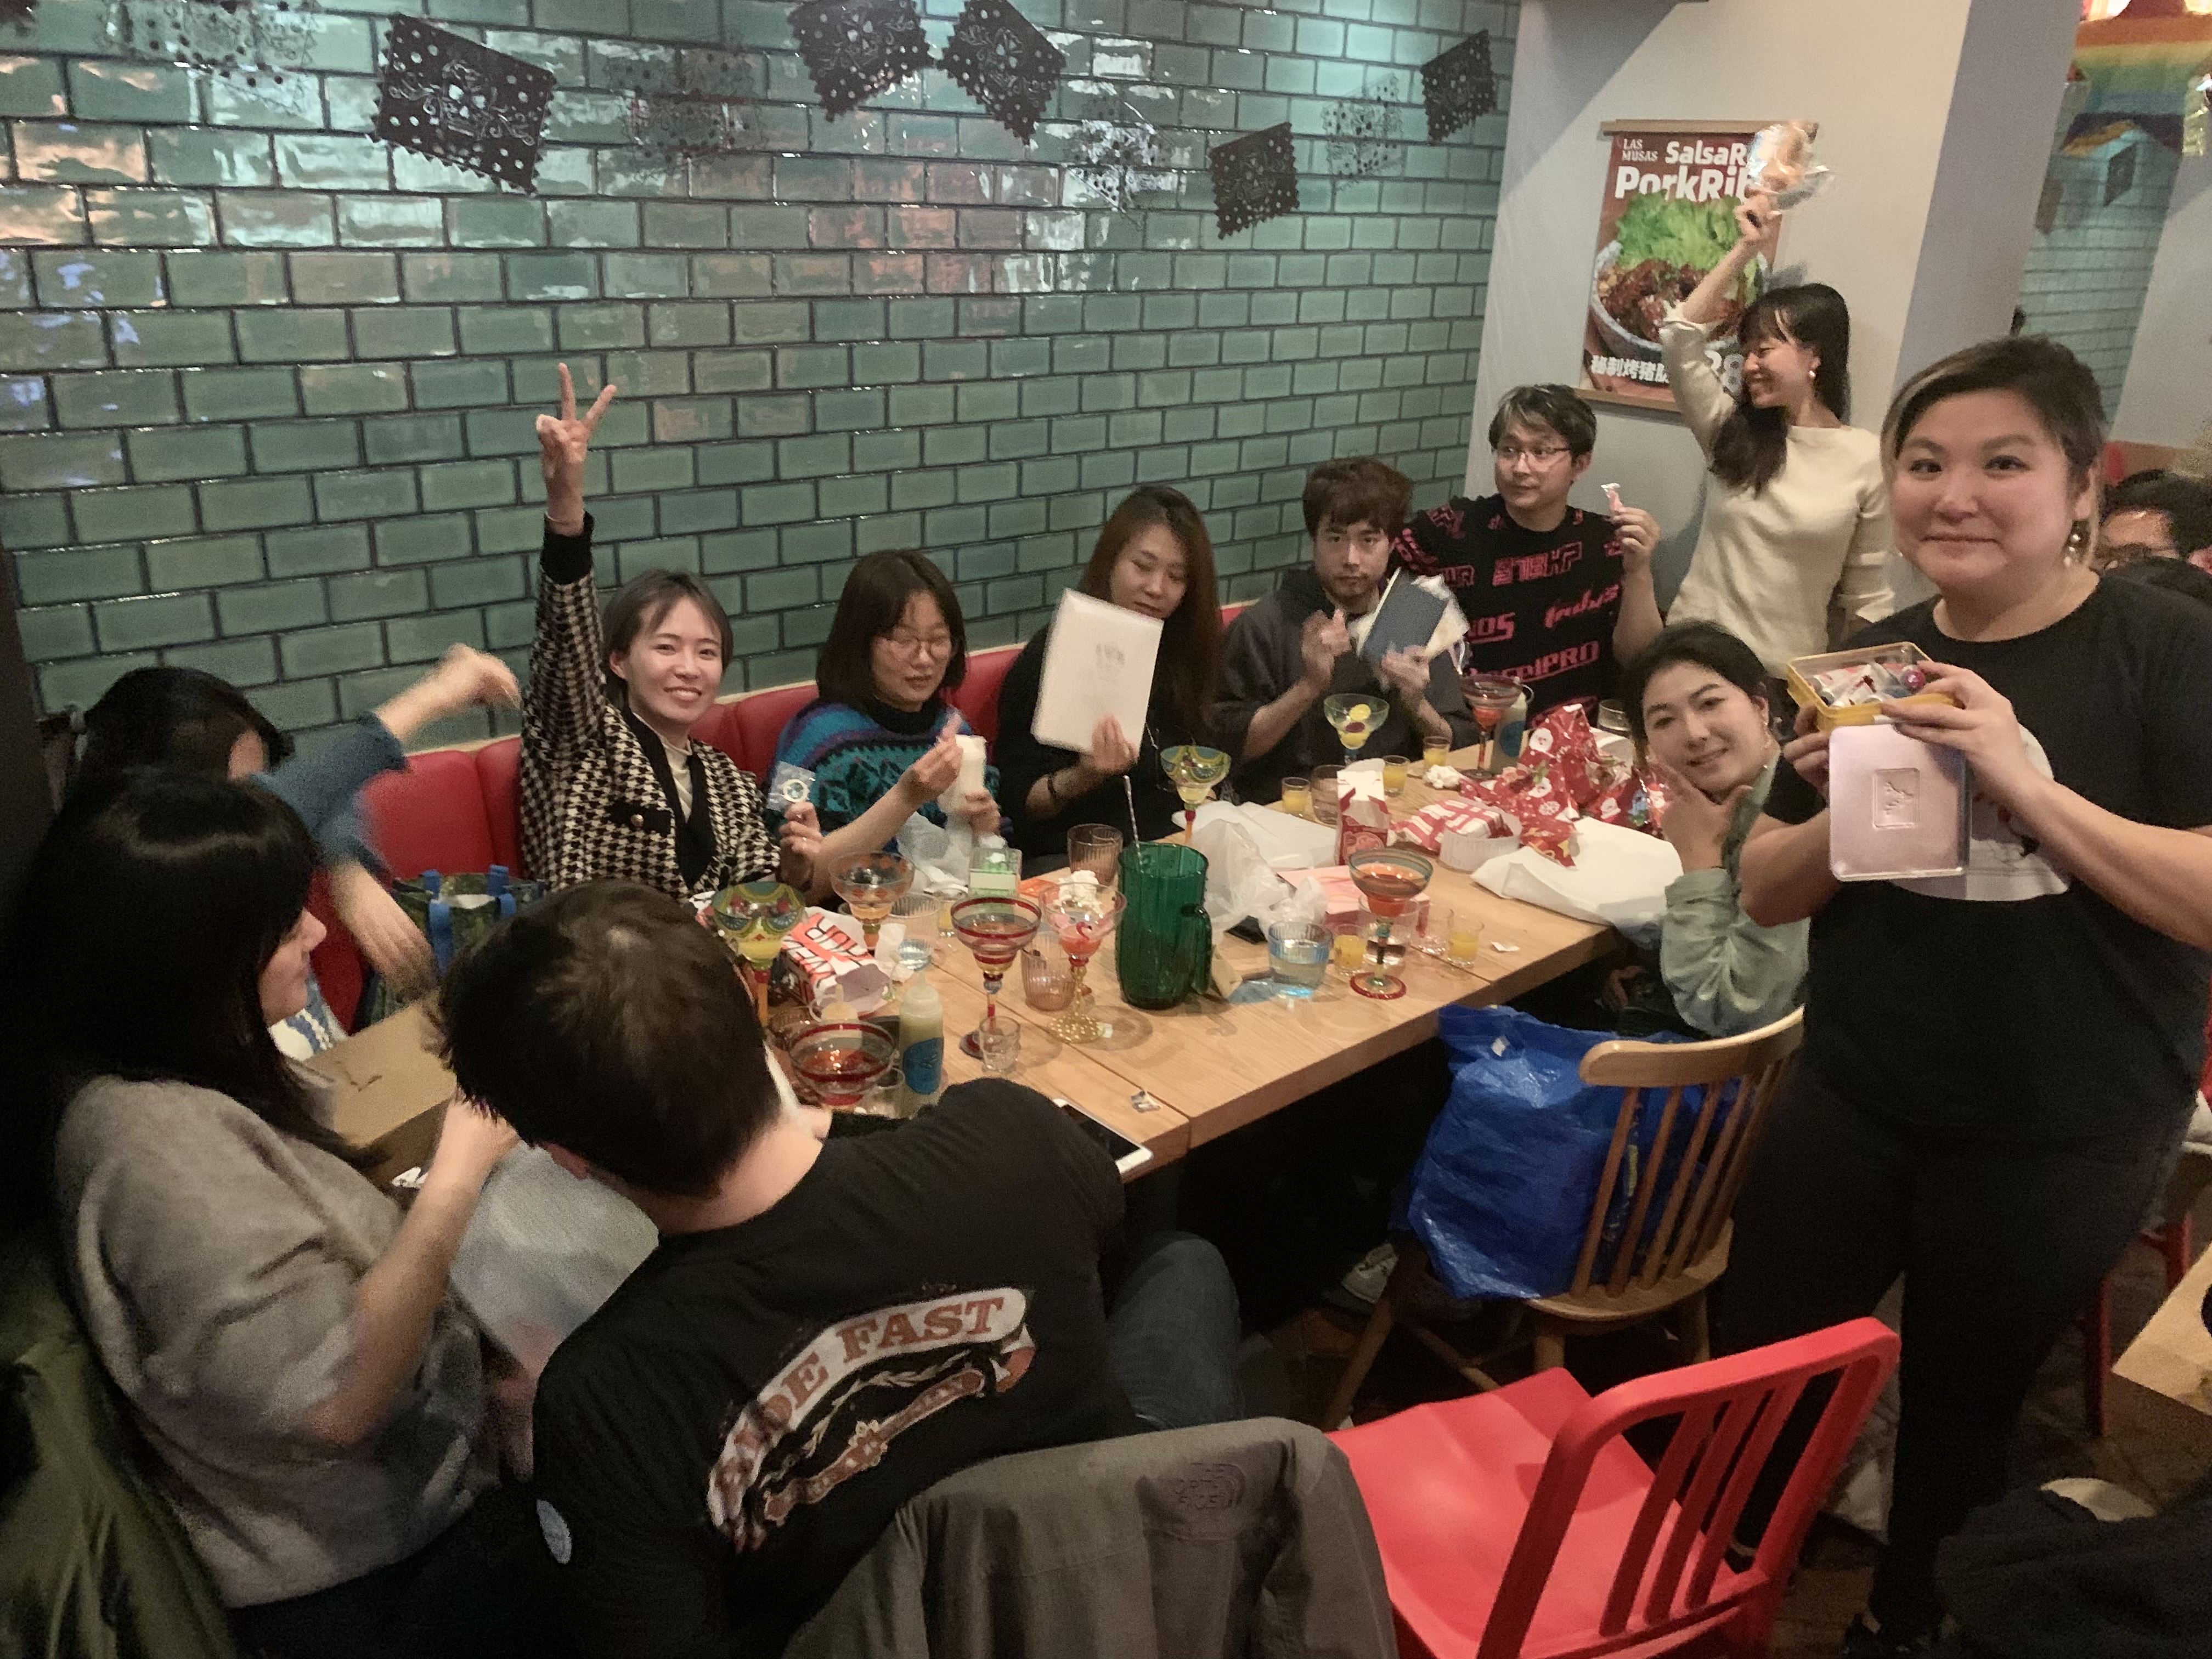 Group of people at a holiday party in a restaurant holding gifts